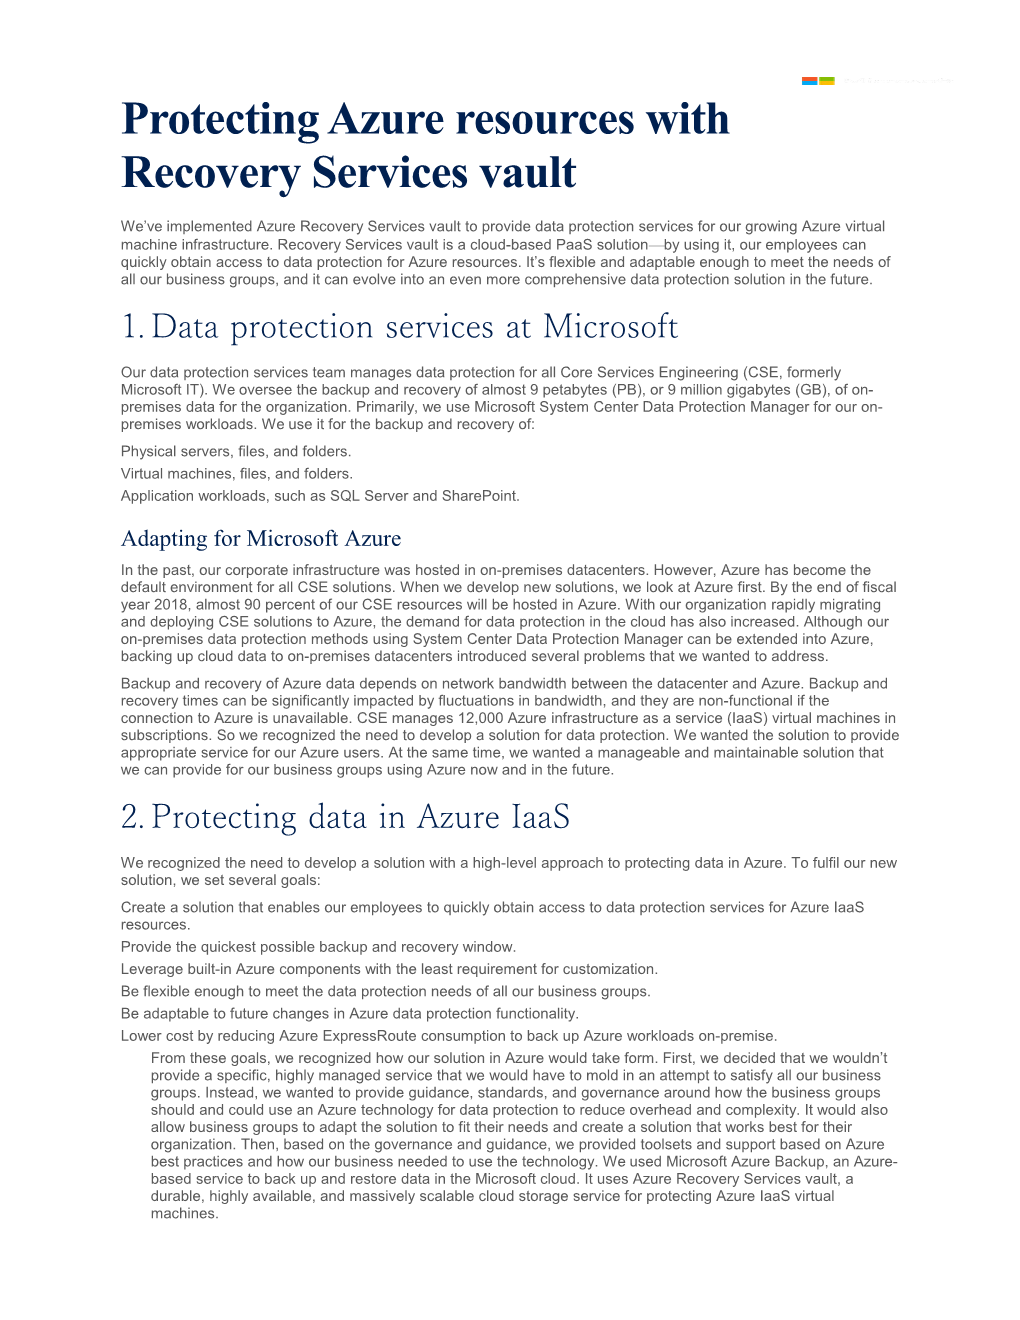 Protecting Azure Resources with Recovery Services Vault